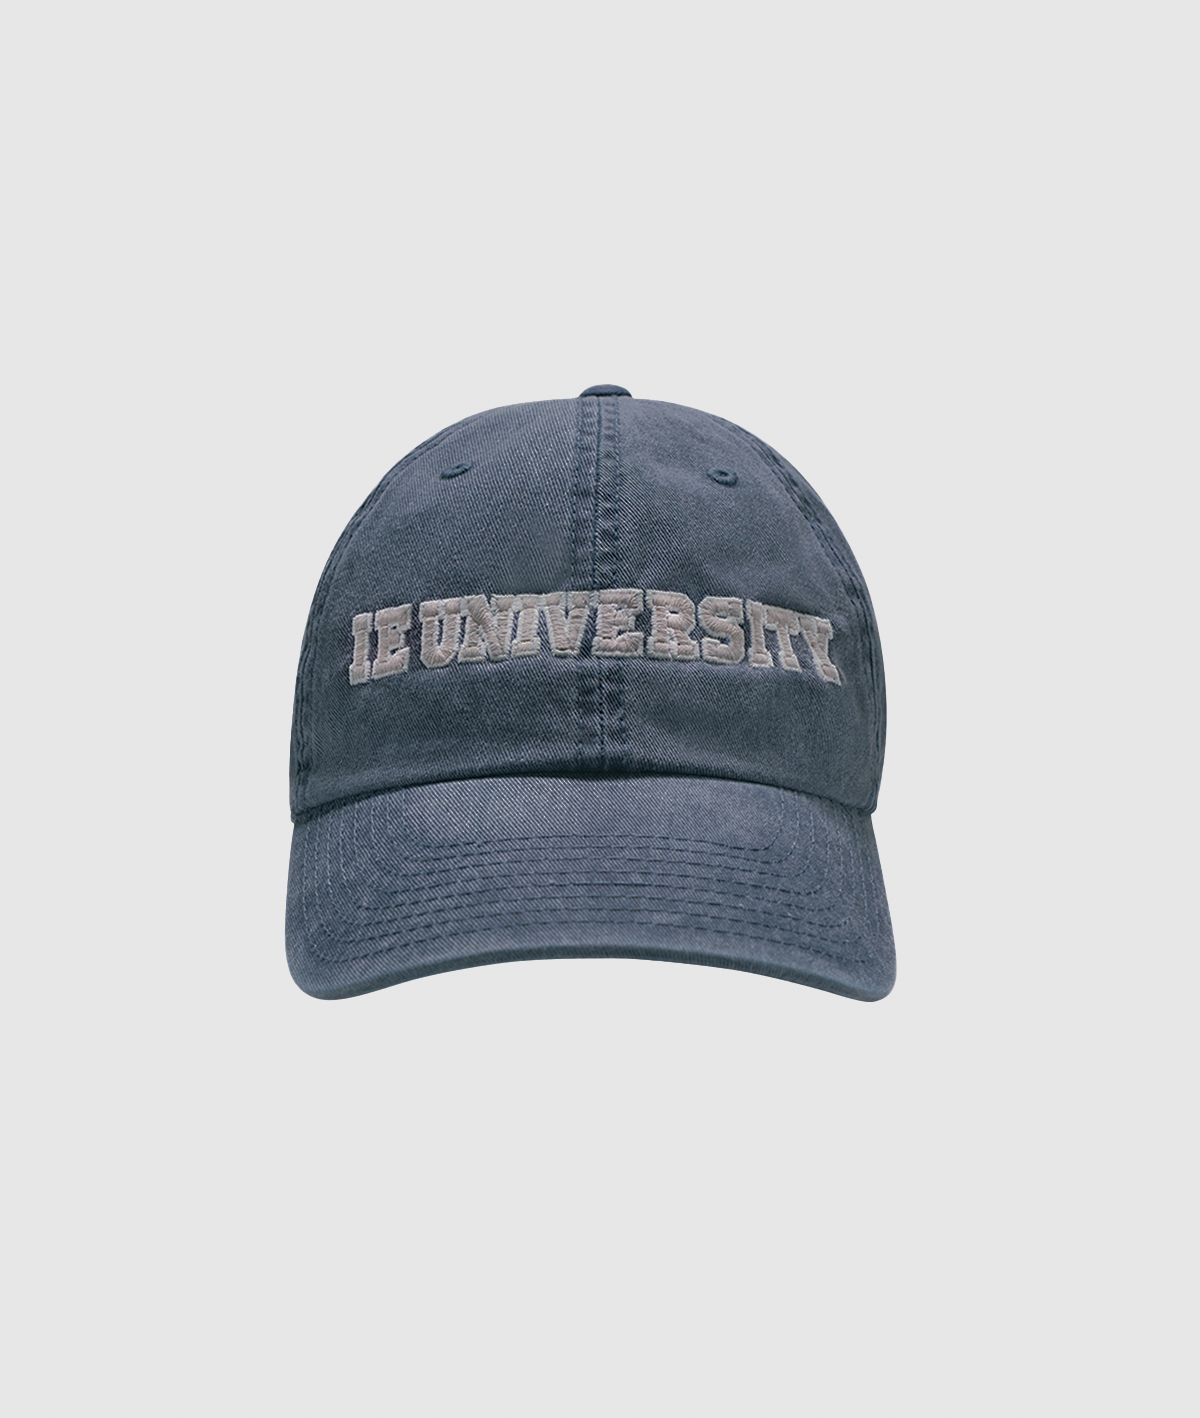 Cap EmbroideryIE University. french-navy colour front